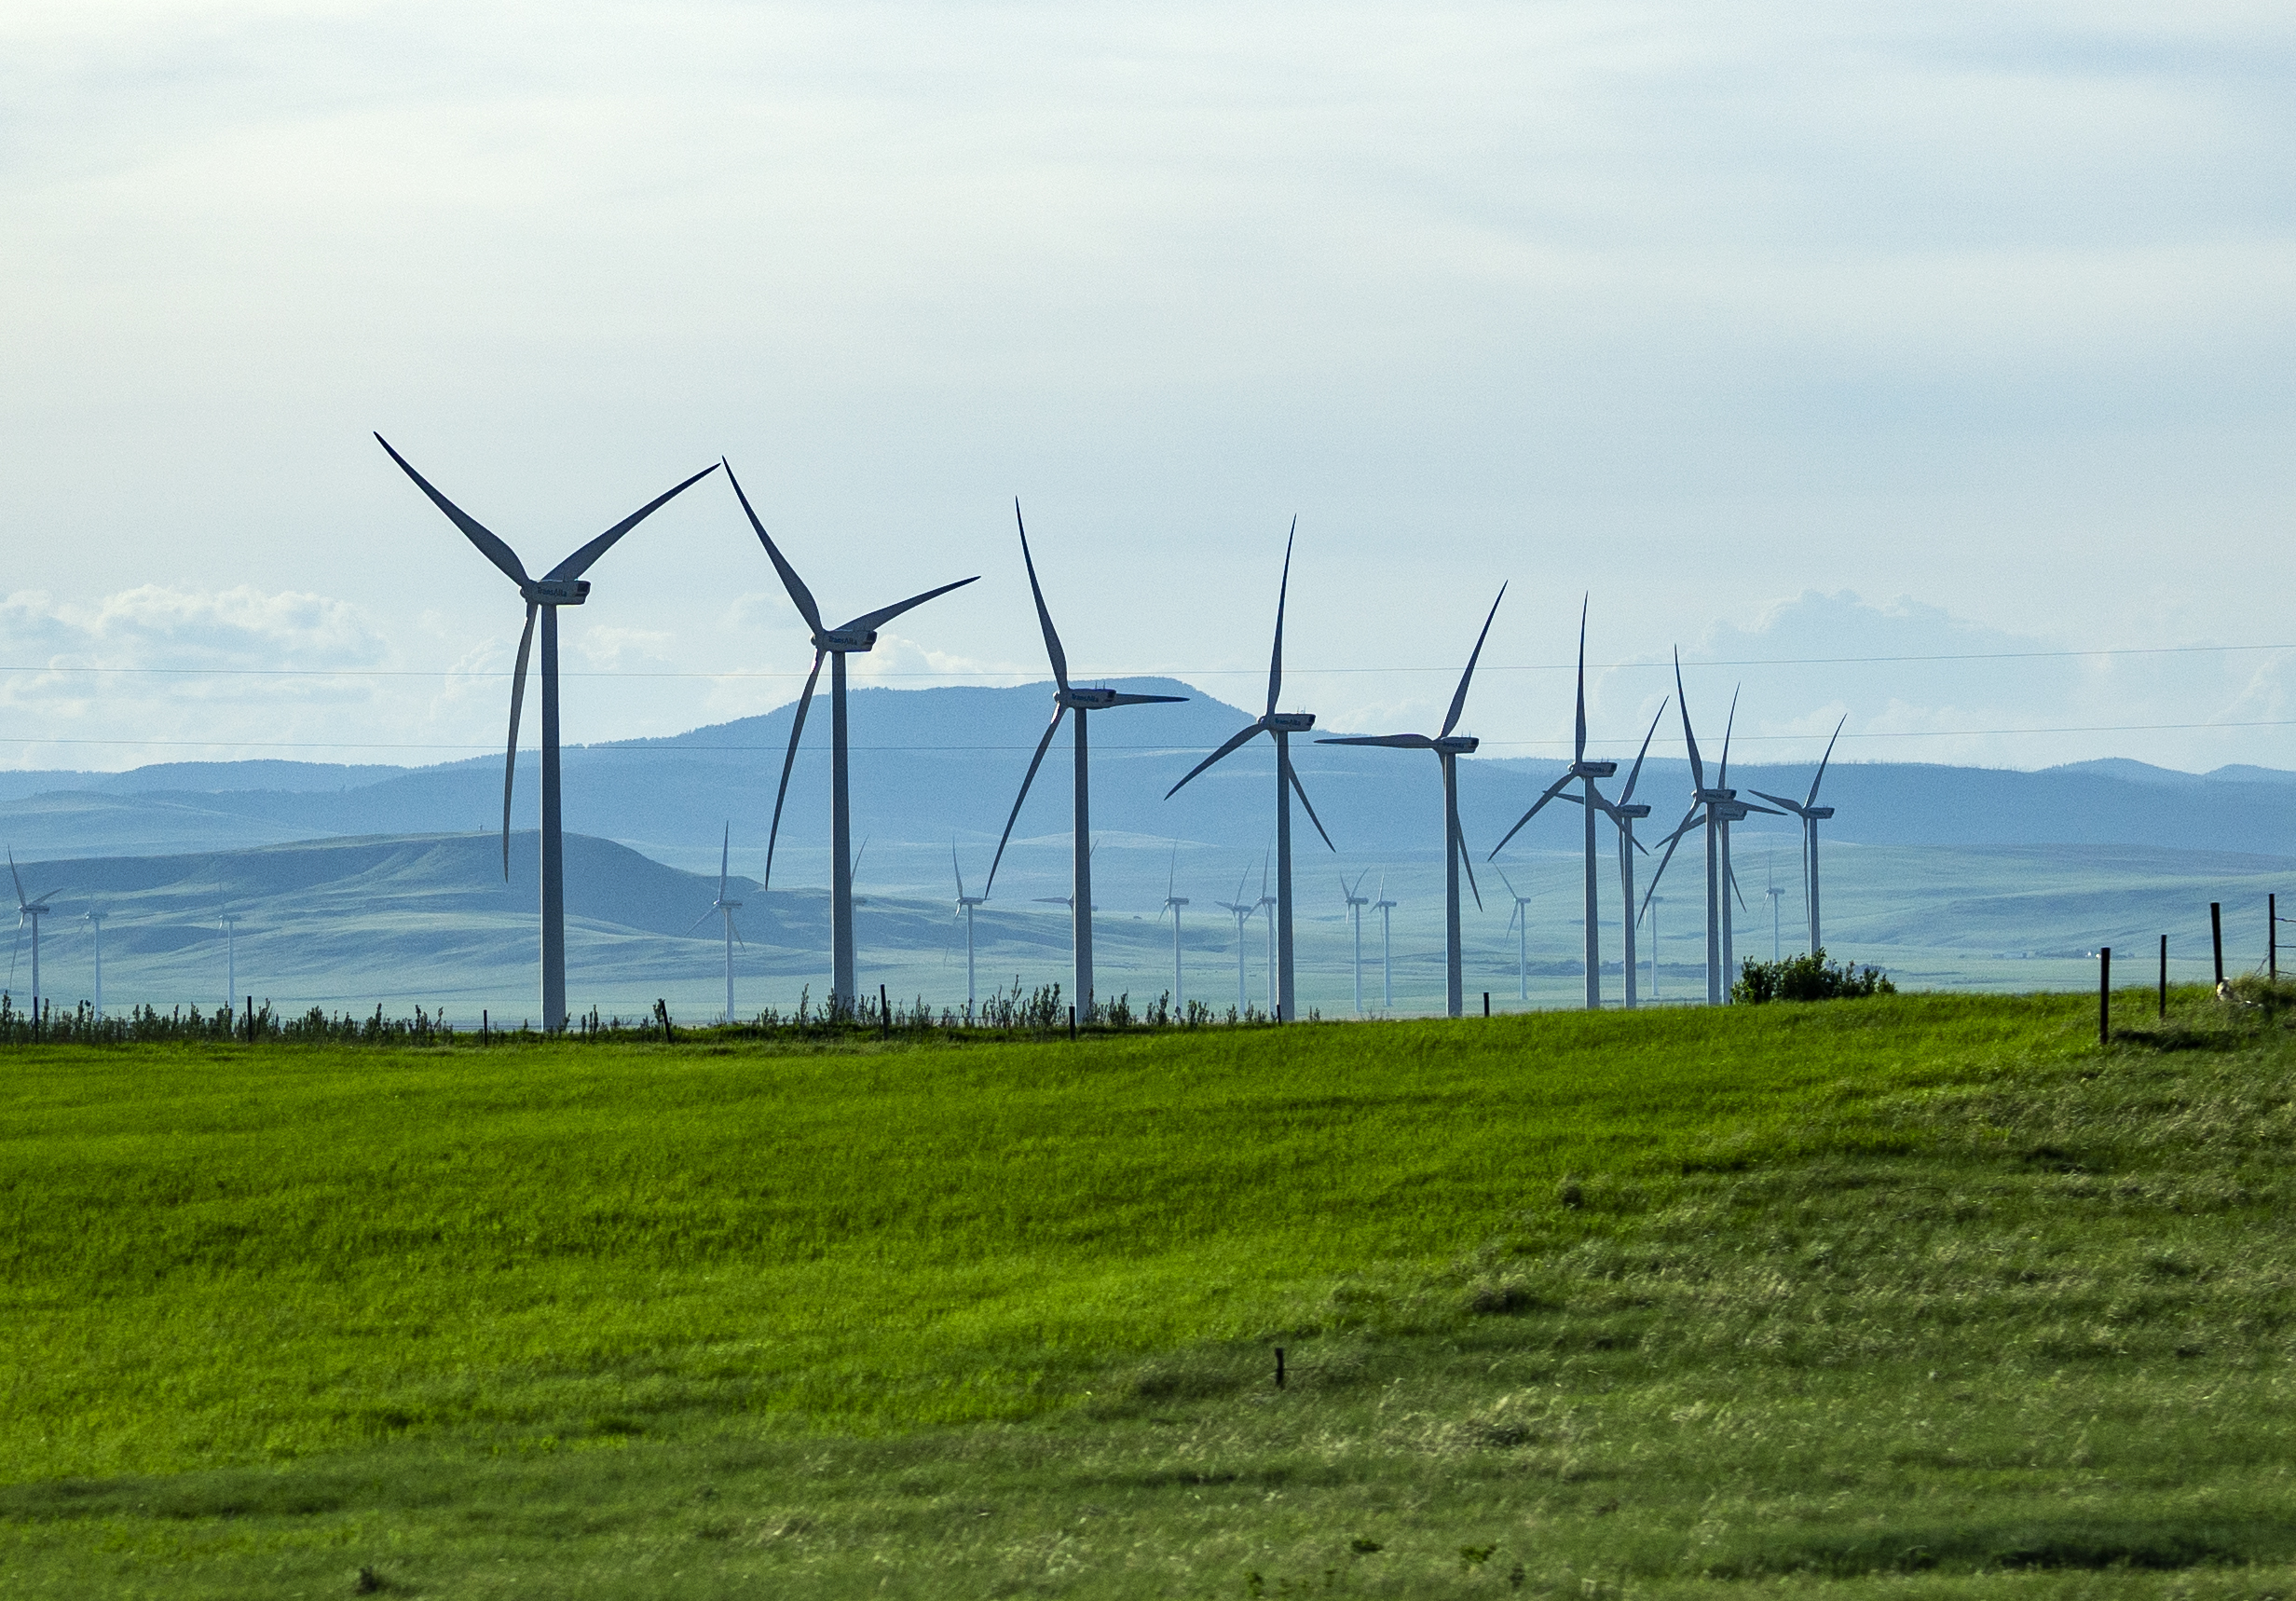 A line of wind turbines in a field with mountains behind at the horizon